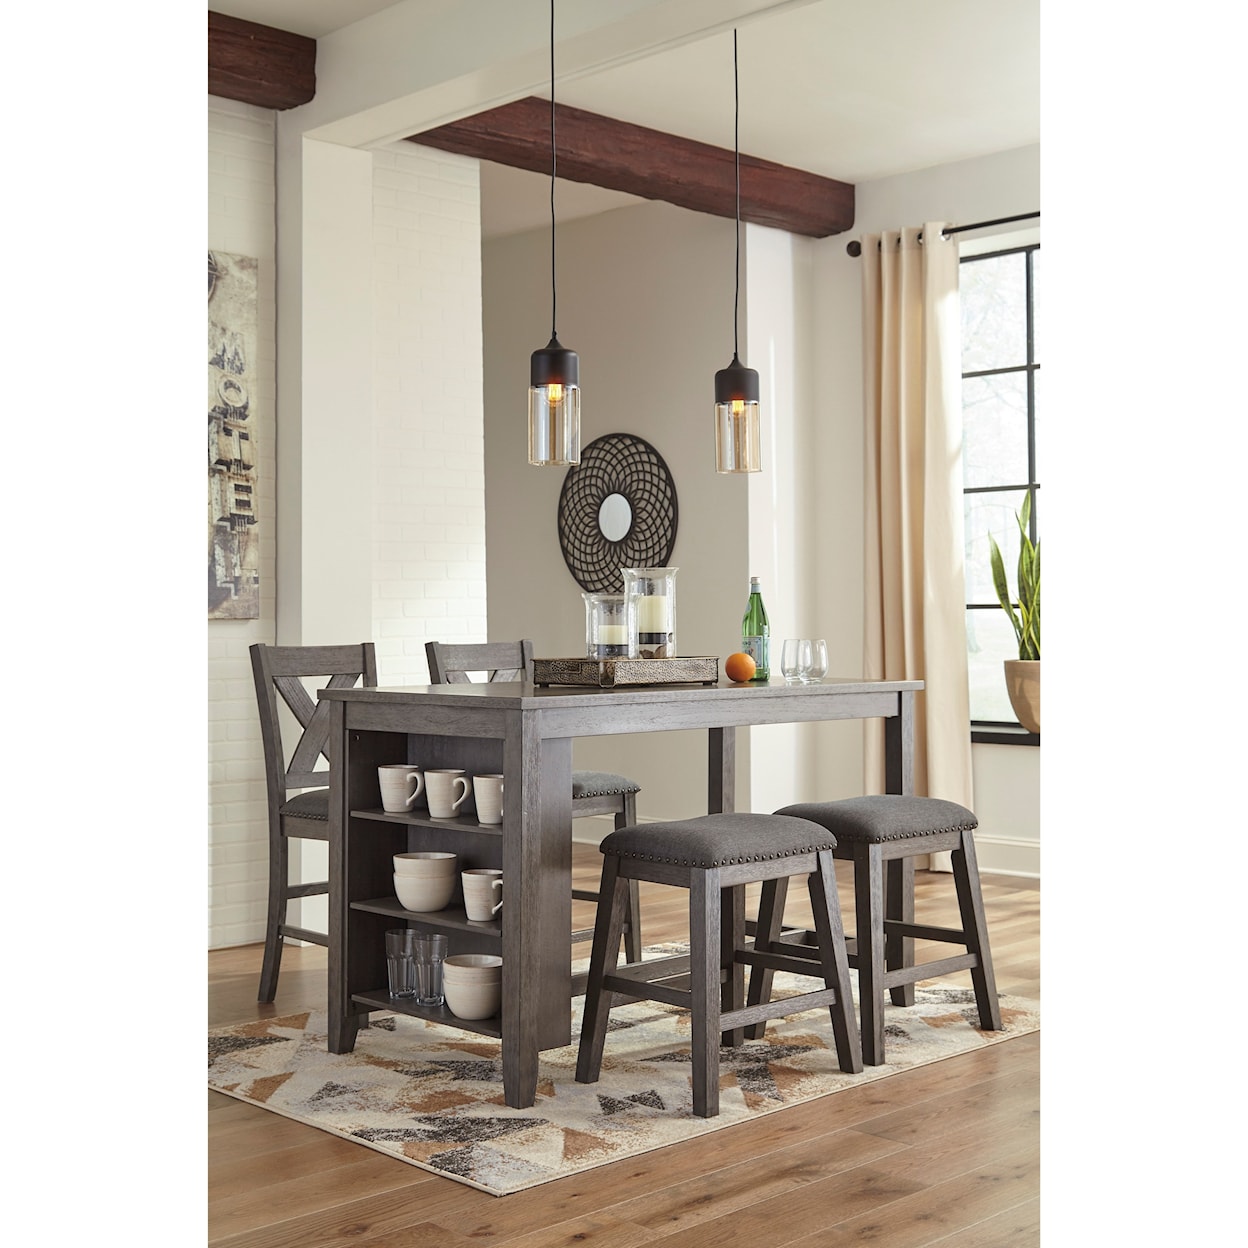 Signature Design by Ashley Furniture Caitbrook Counter Height Table